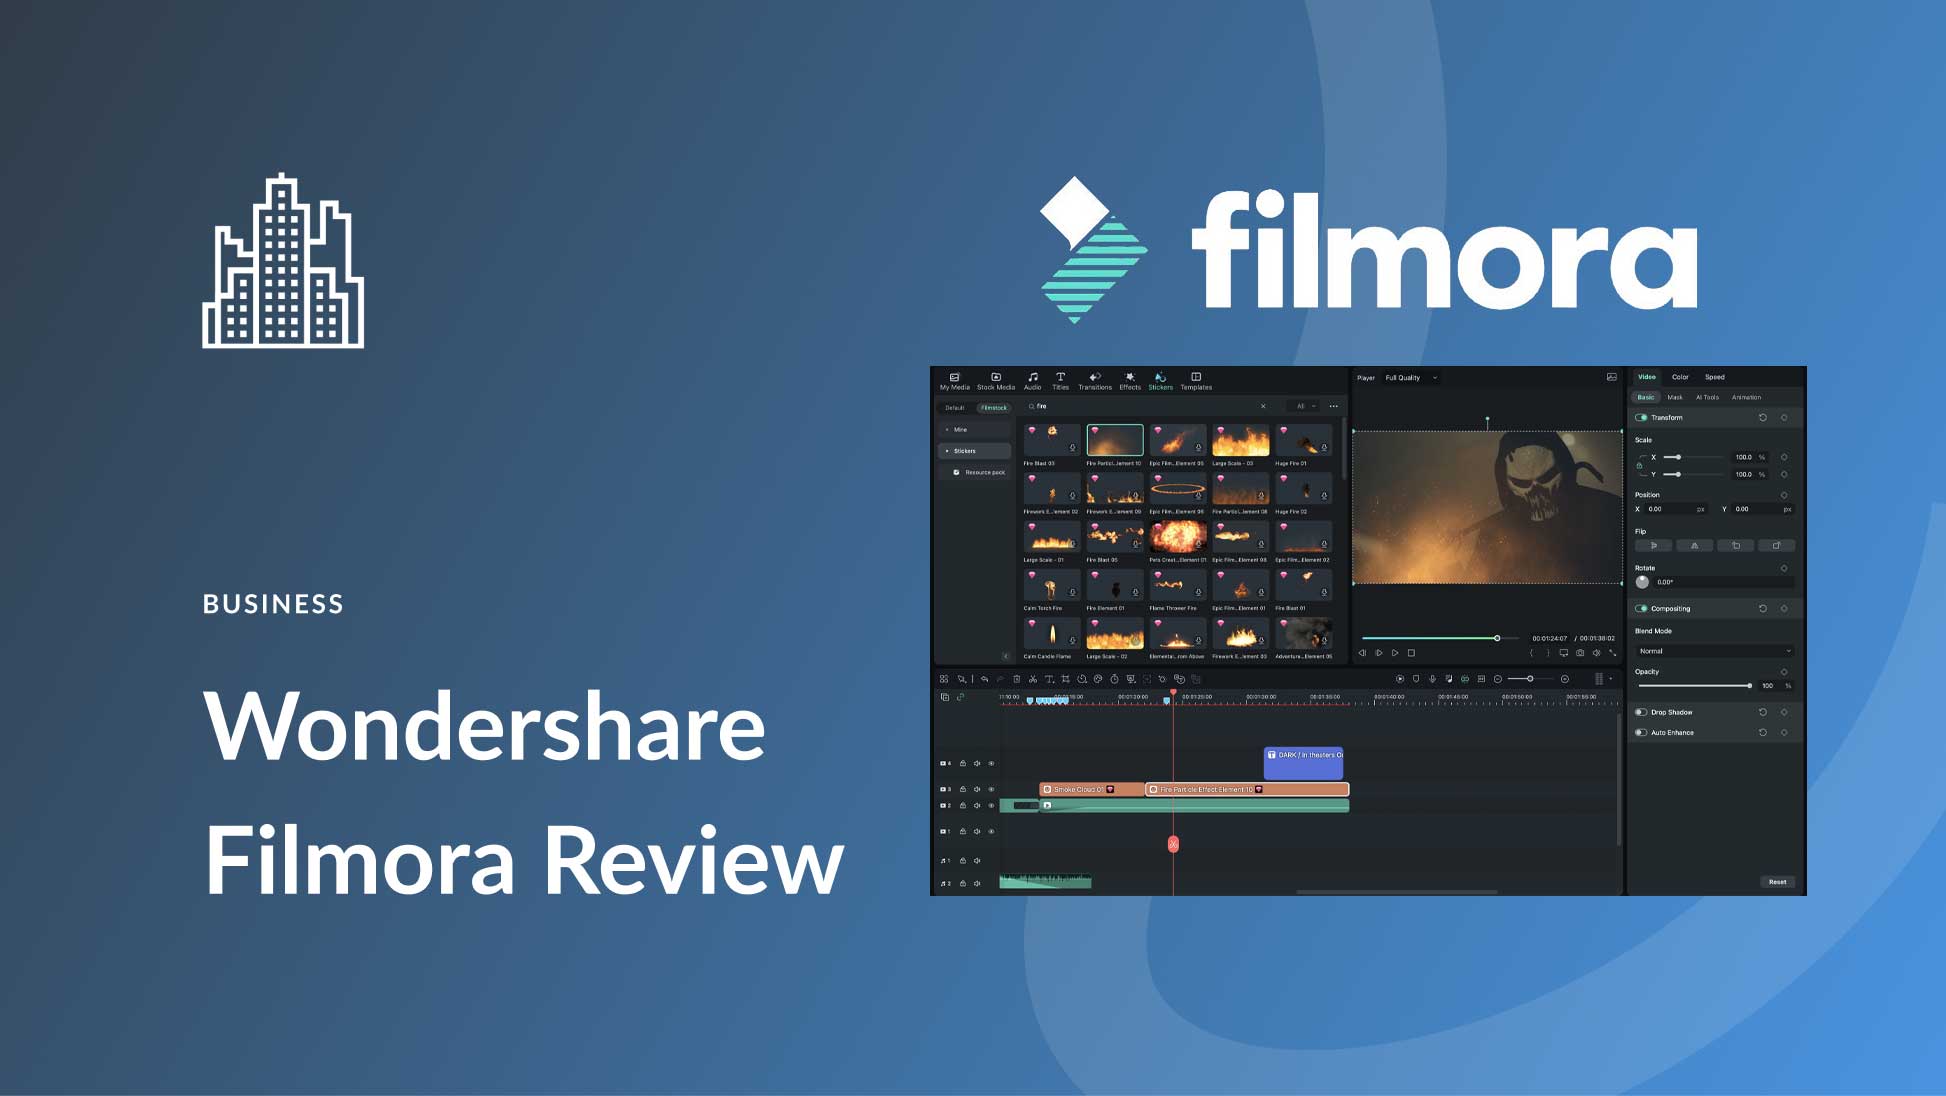 Wondershare Filmora Review: Pricing, Features & More (2023)